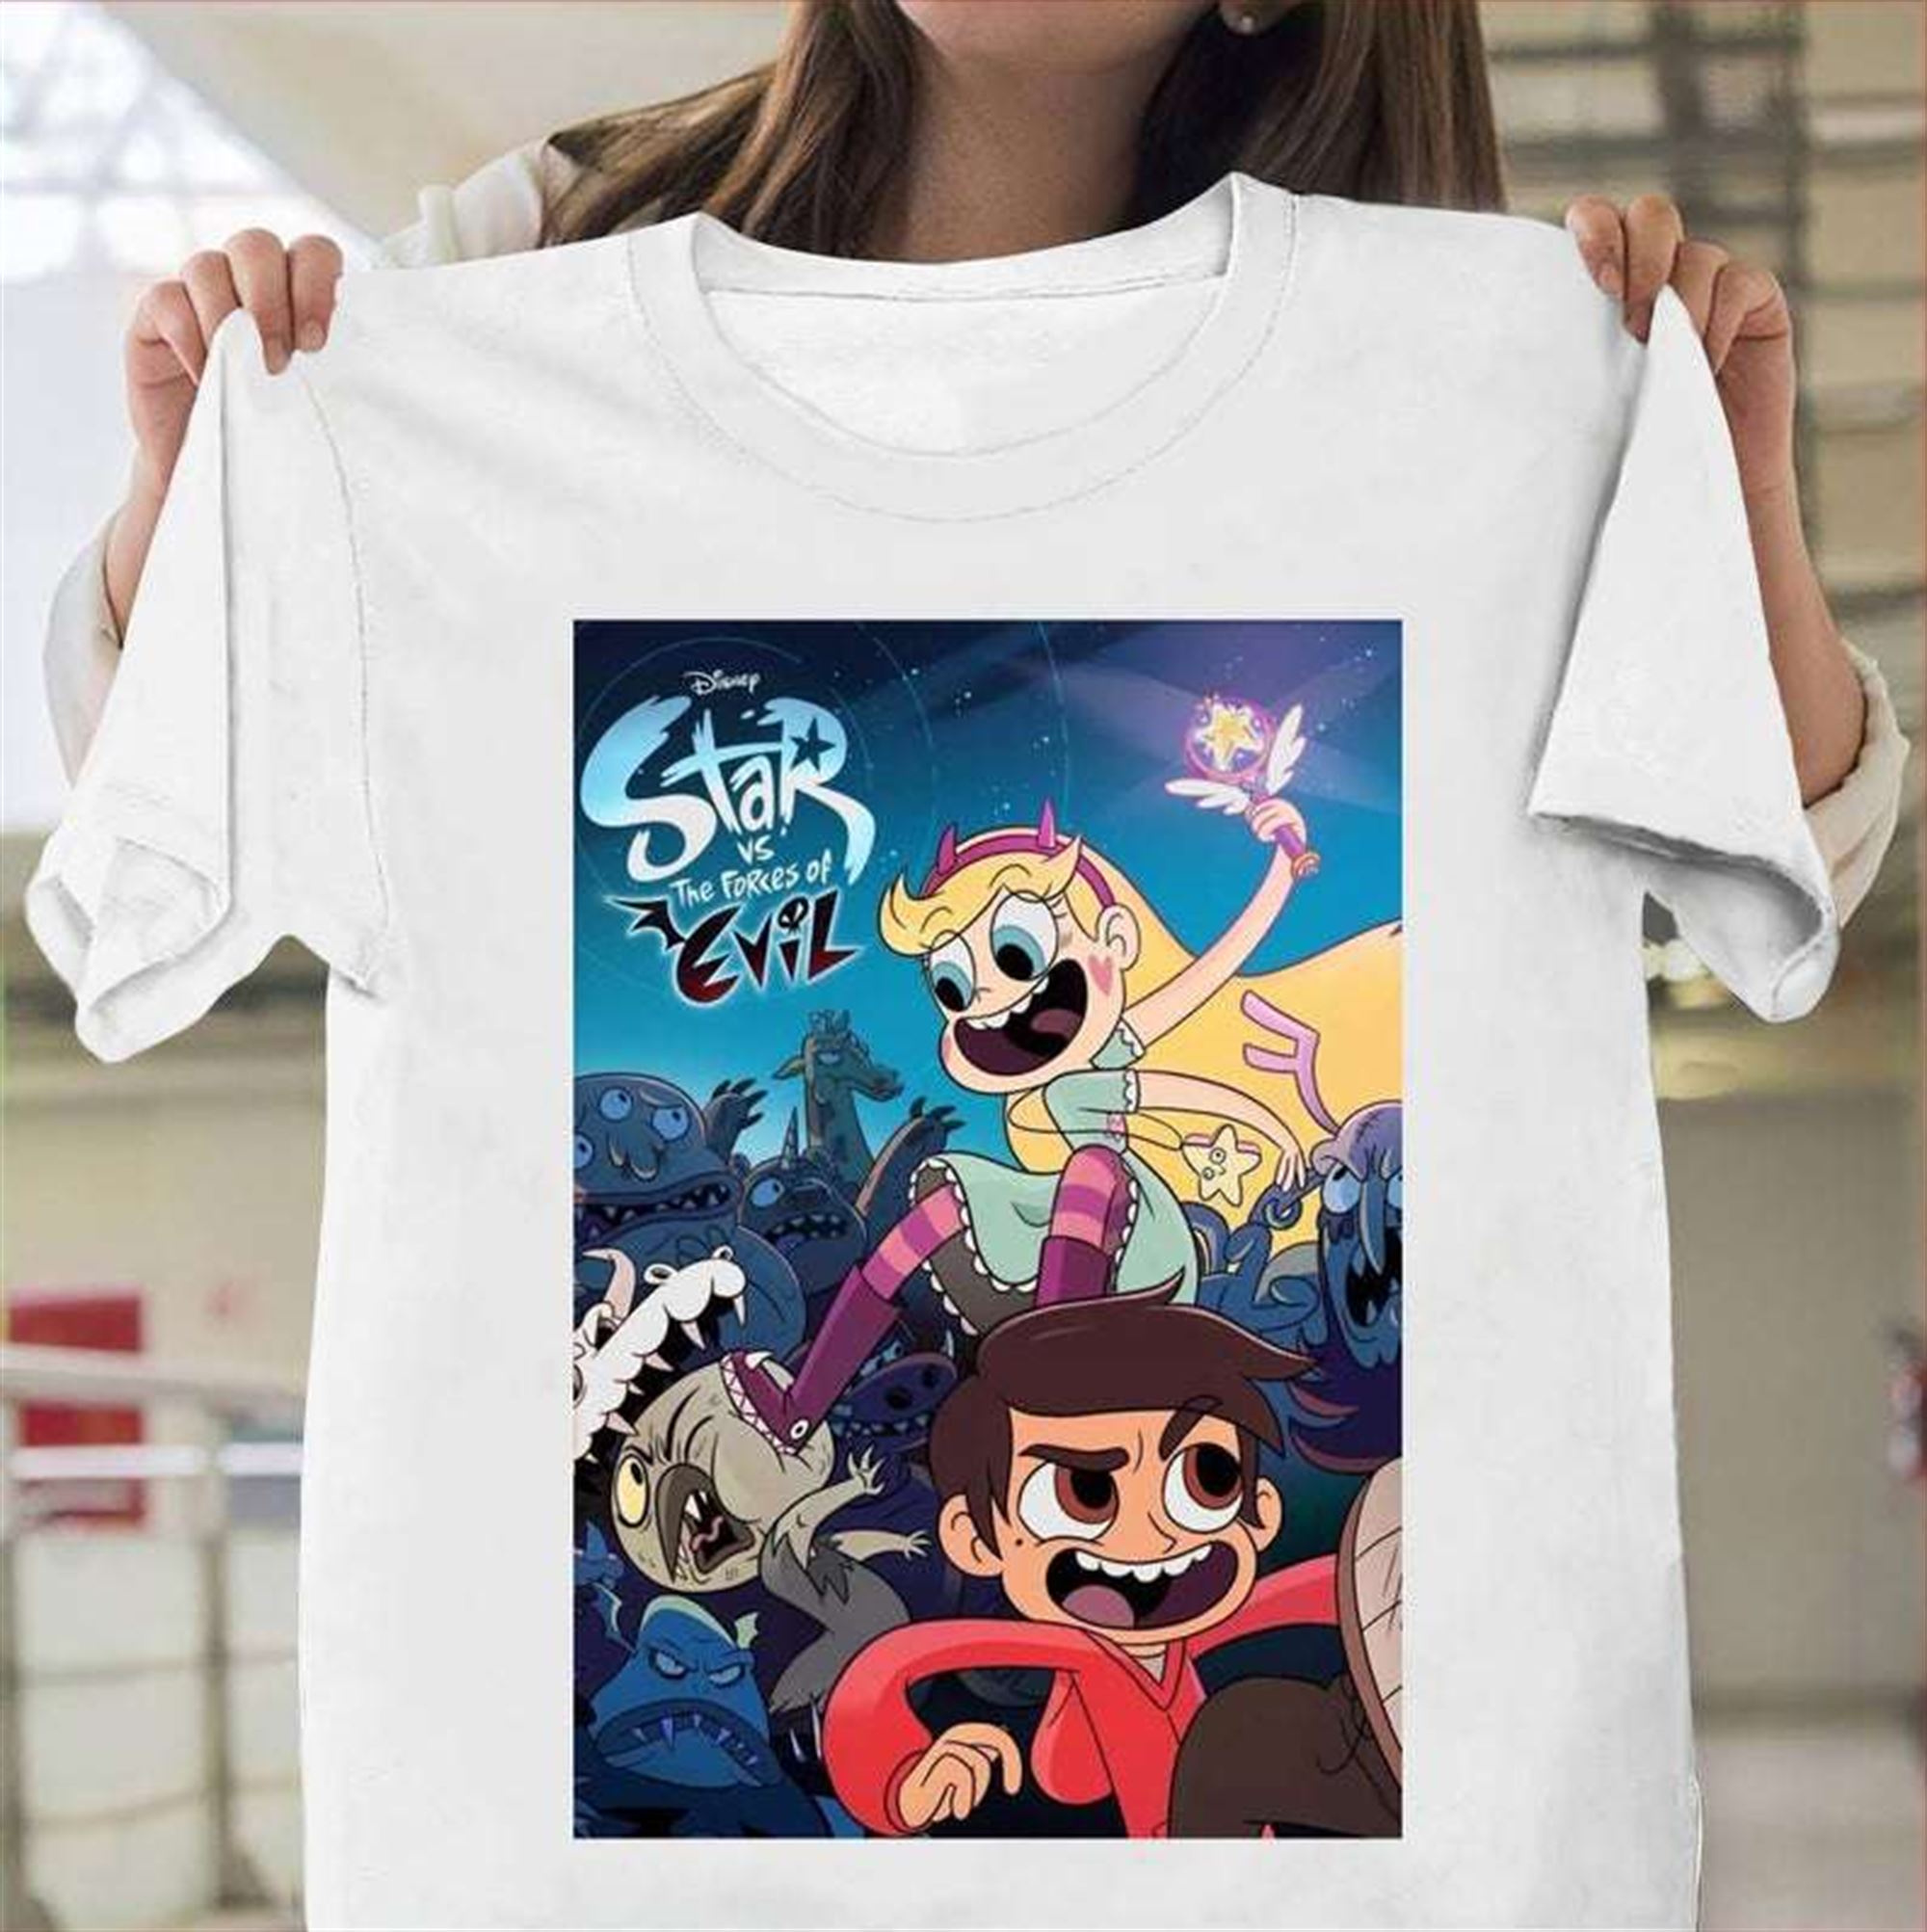 Disney Star Vs The Forces Of Evil T Shirt Full Size Up To 5xl